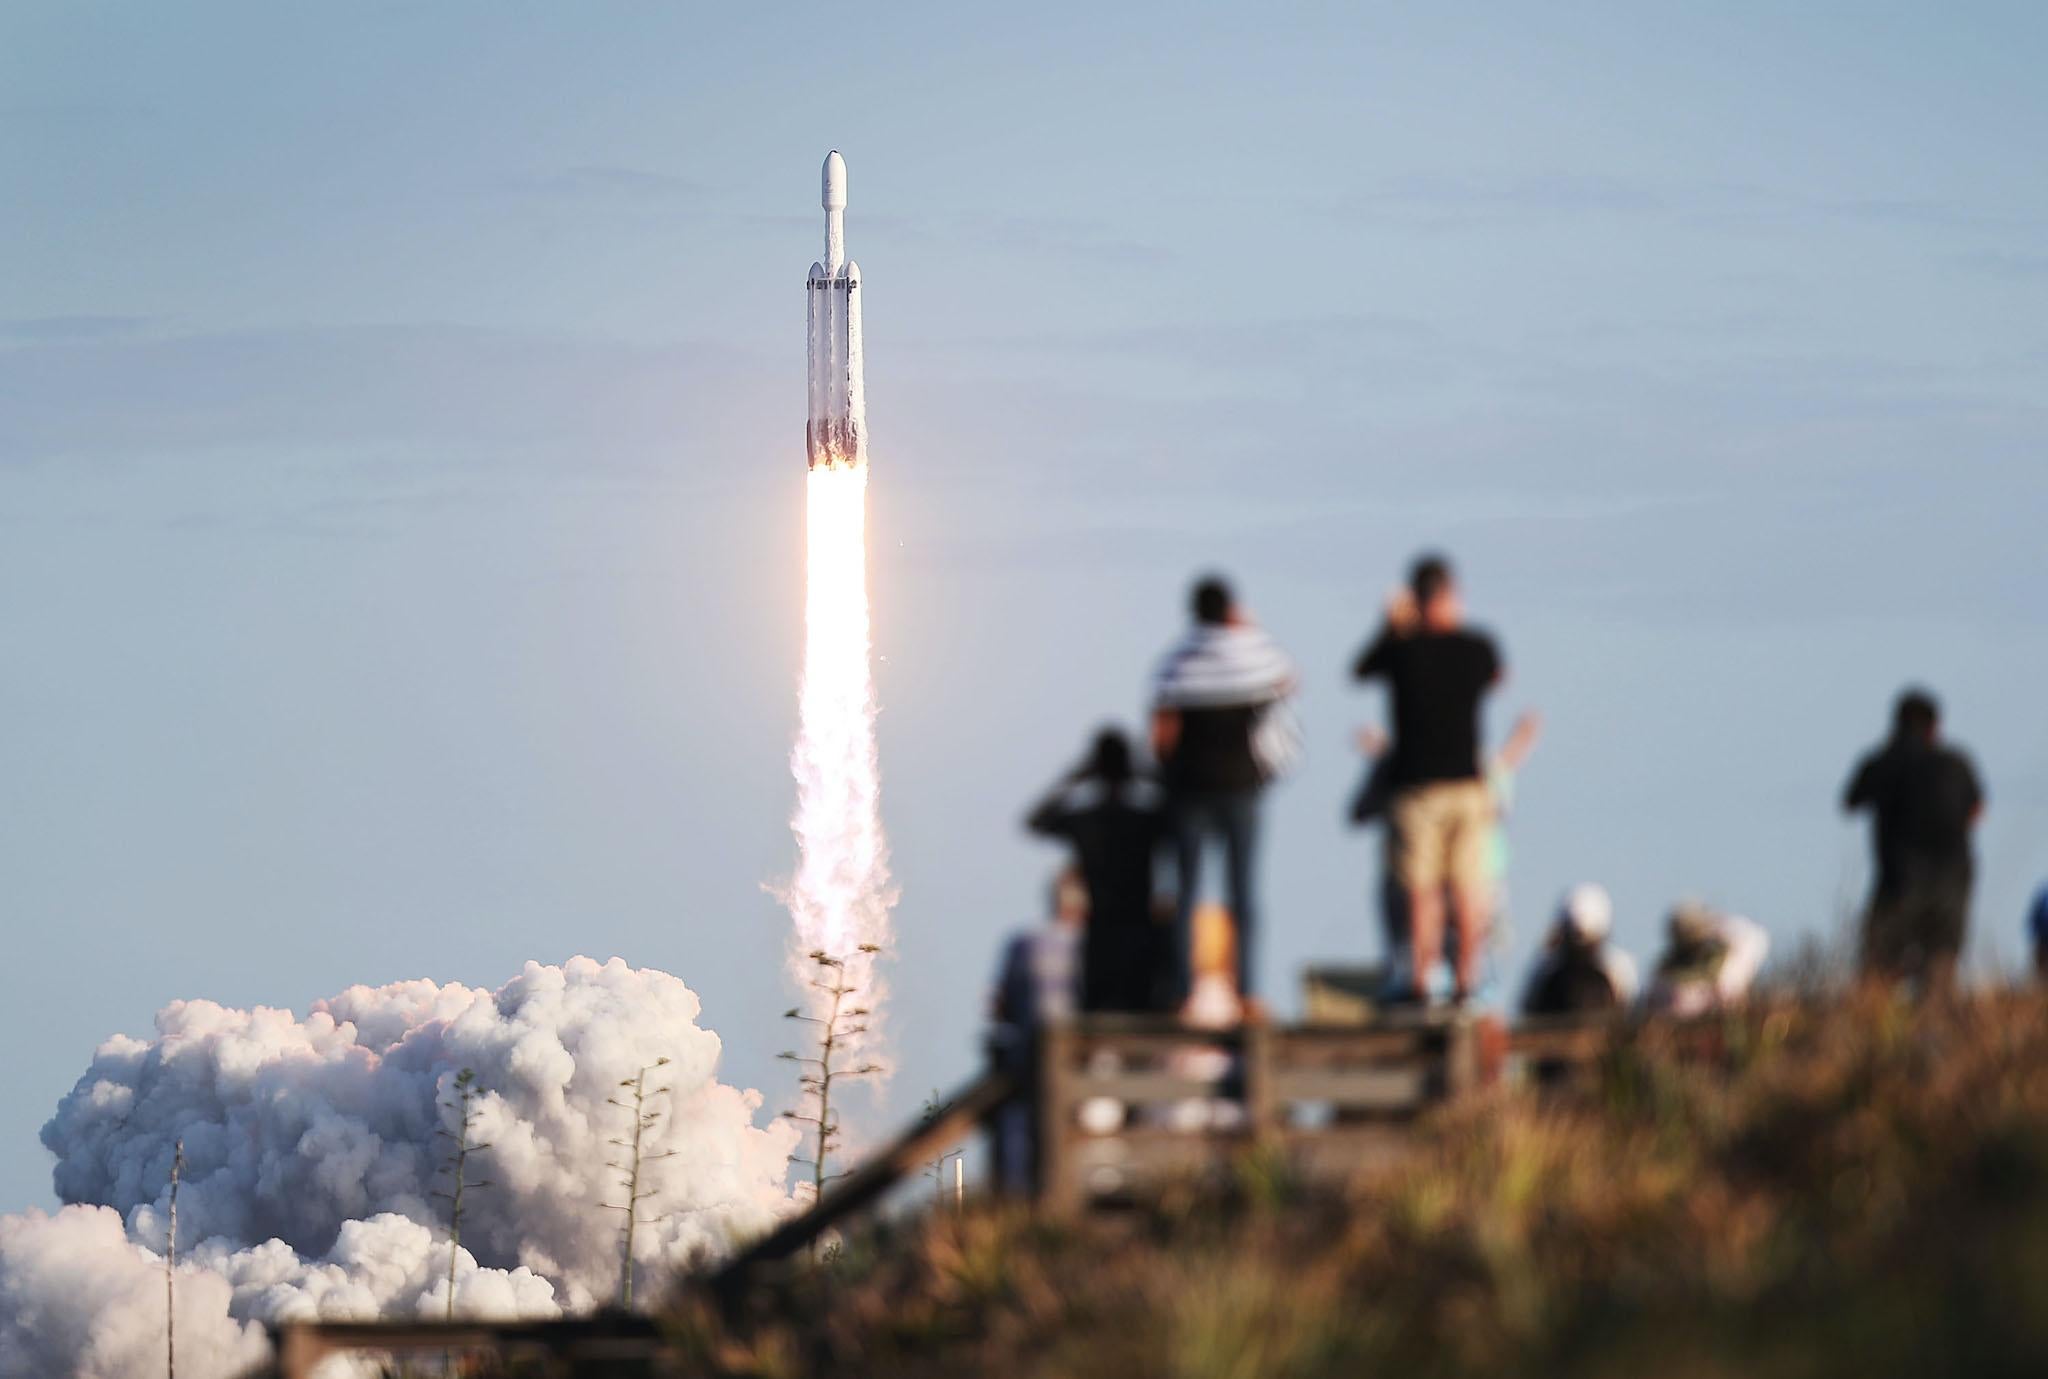 People watch as the SpaceX Falcon Heavy rocket lifts off from launch pad 39A at NASA's Kennedy Space Center